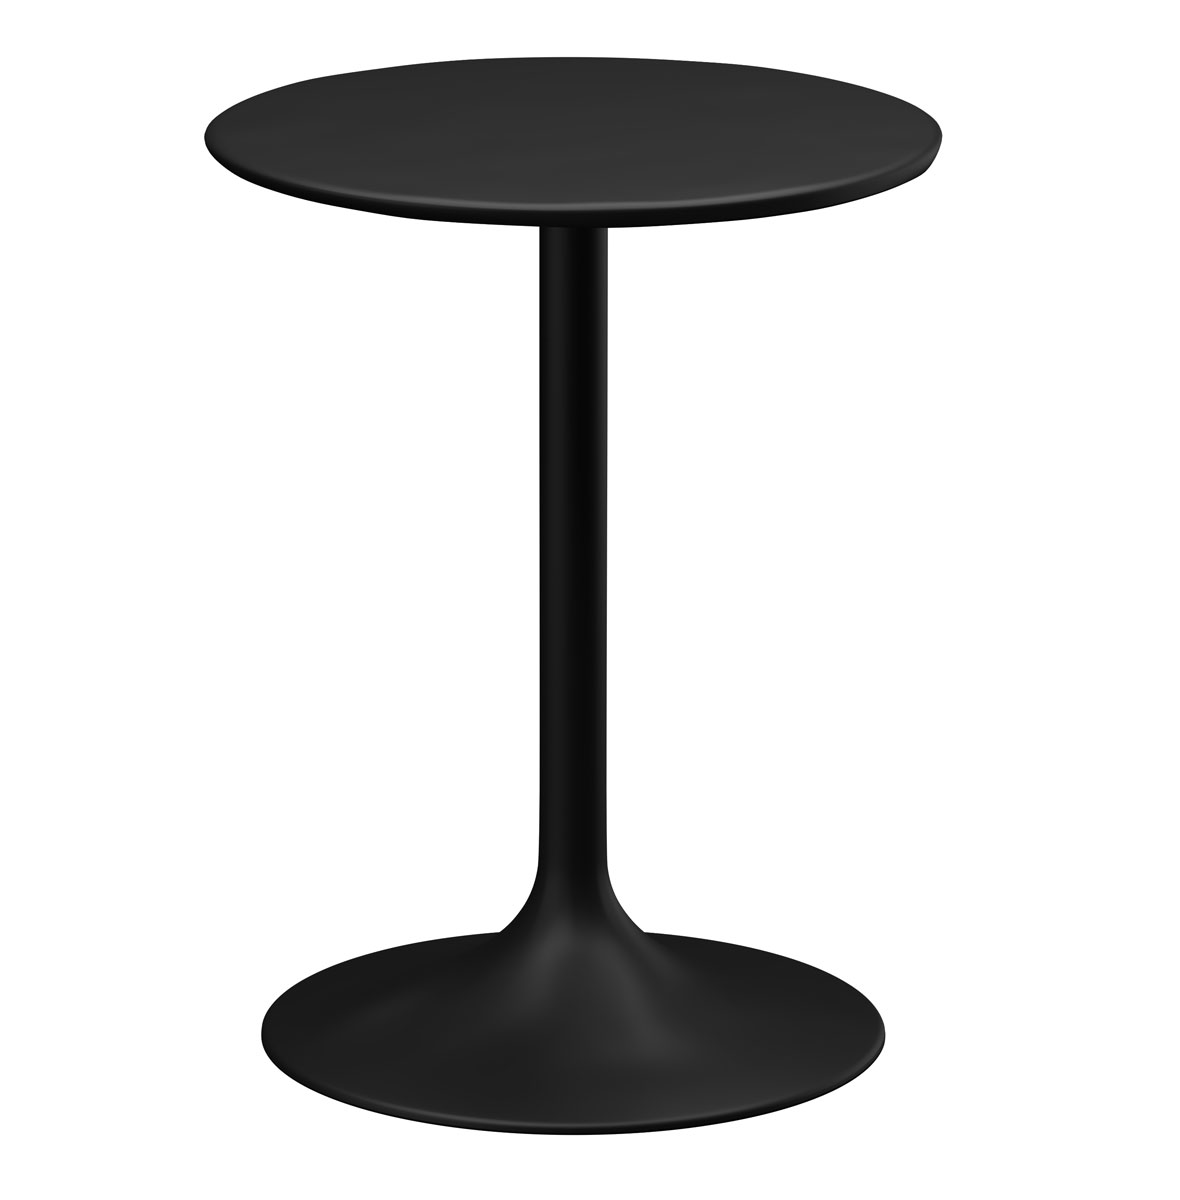 Castelle Tulip 32 inch Round Bar Height Table